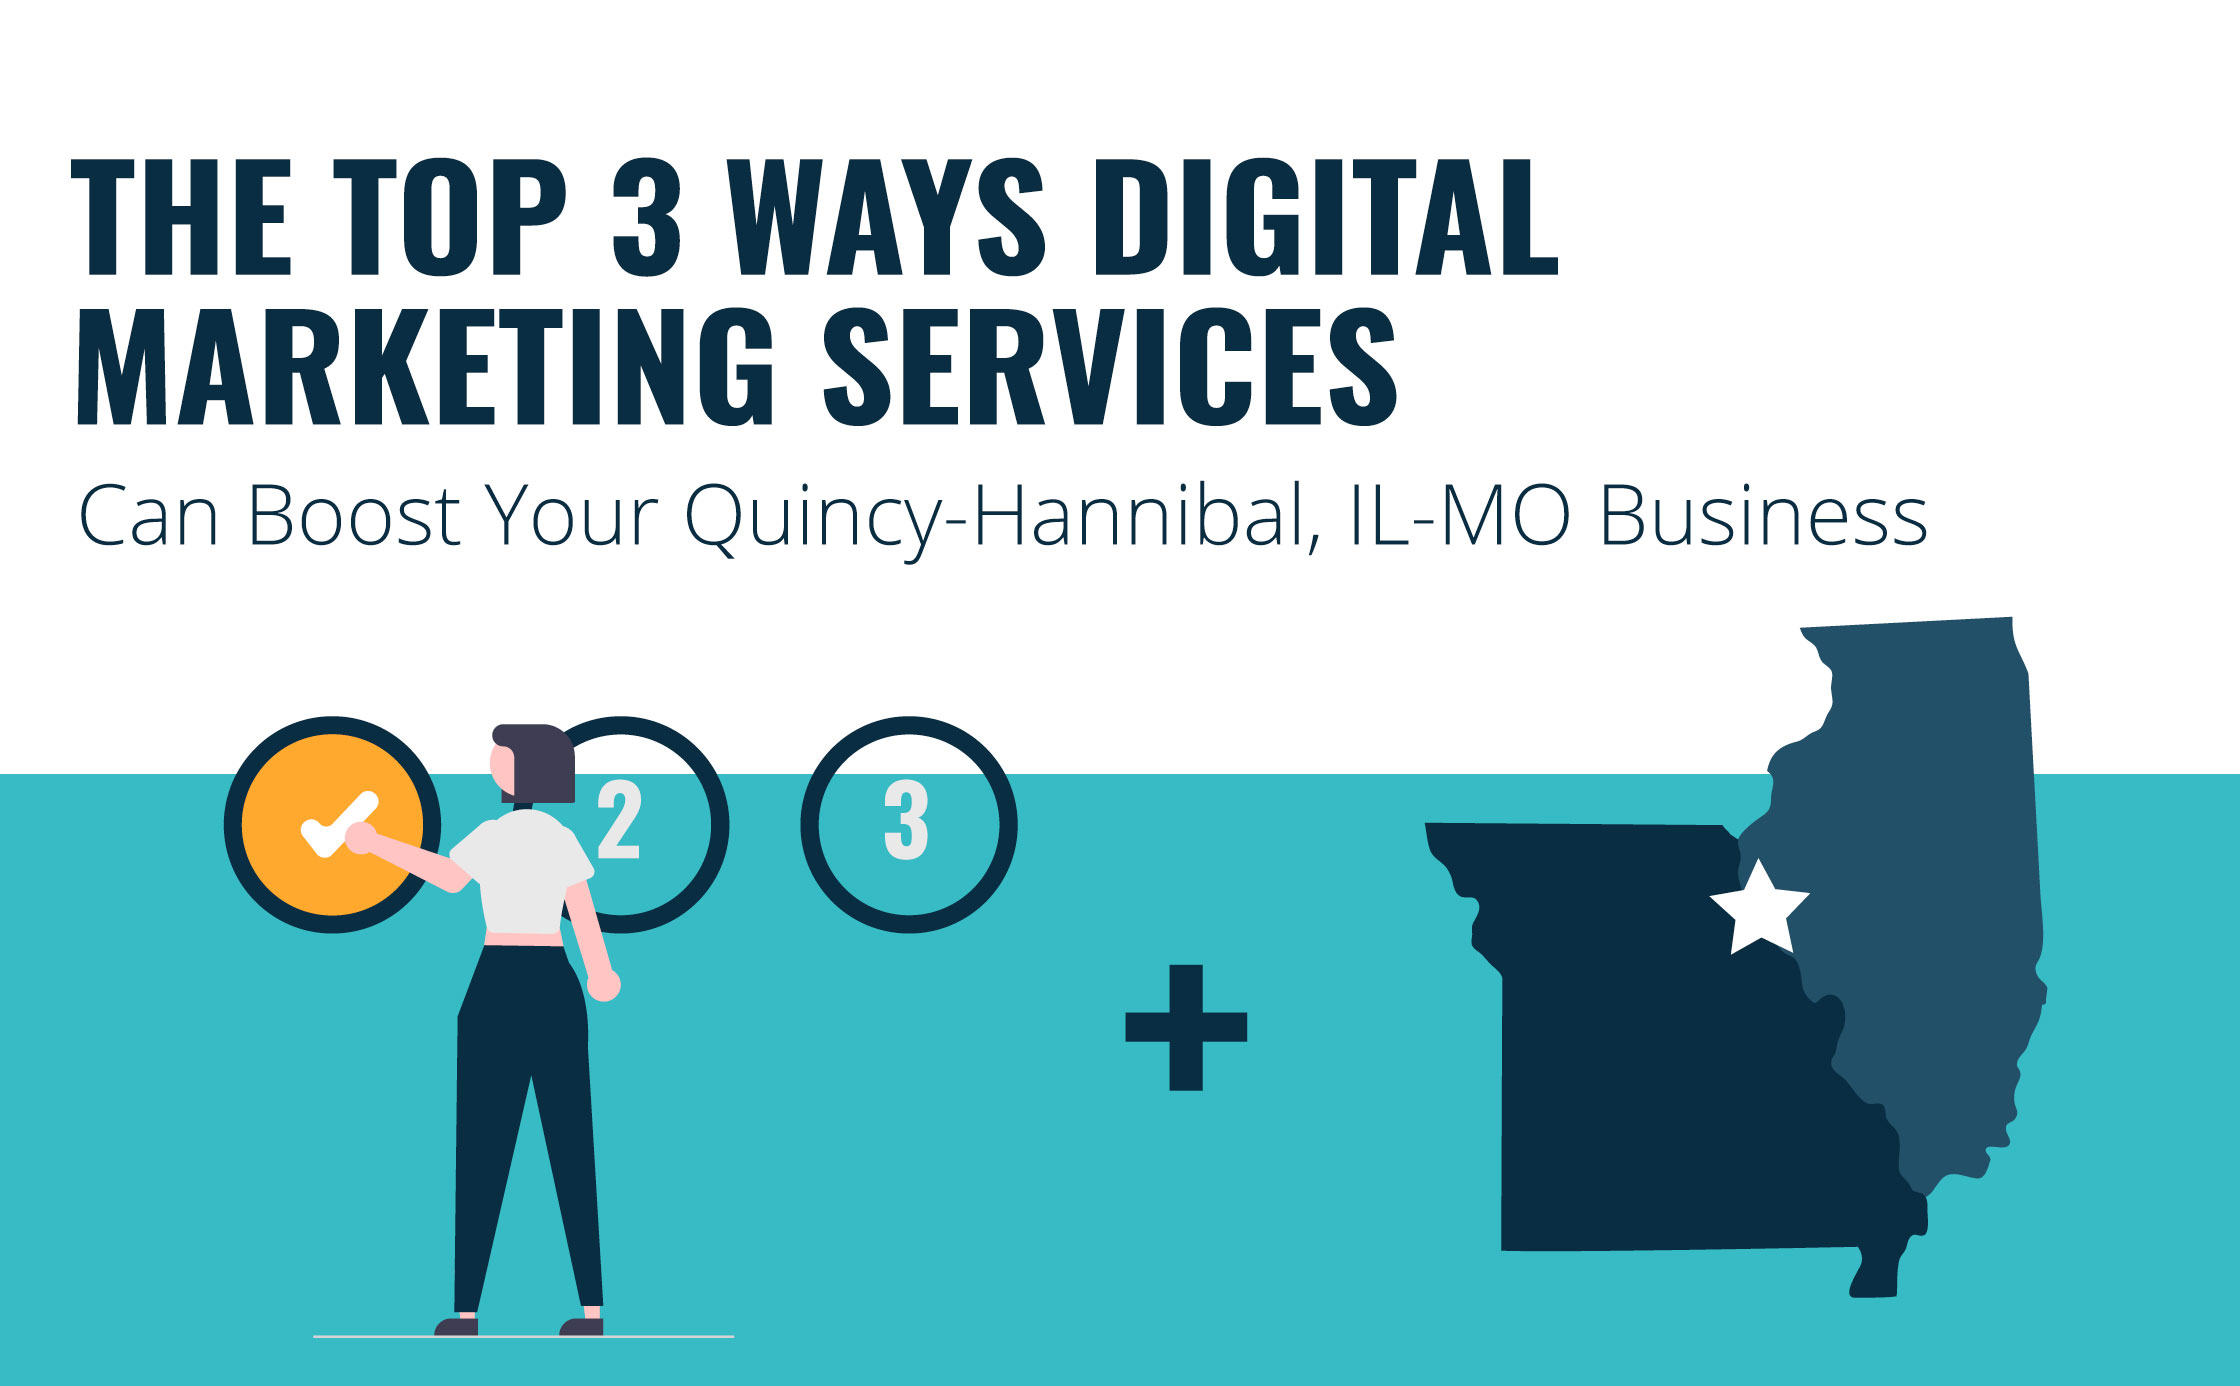 3 Ways Digital Marketing Services Can Boost Your Quincy-Hannibal, IL-MO Business